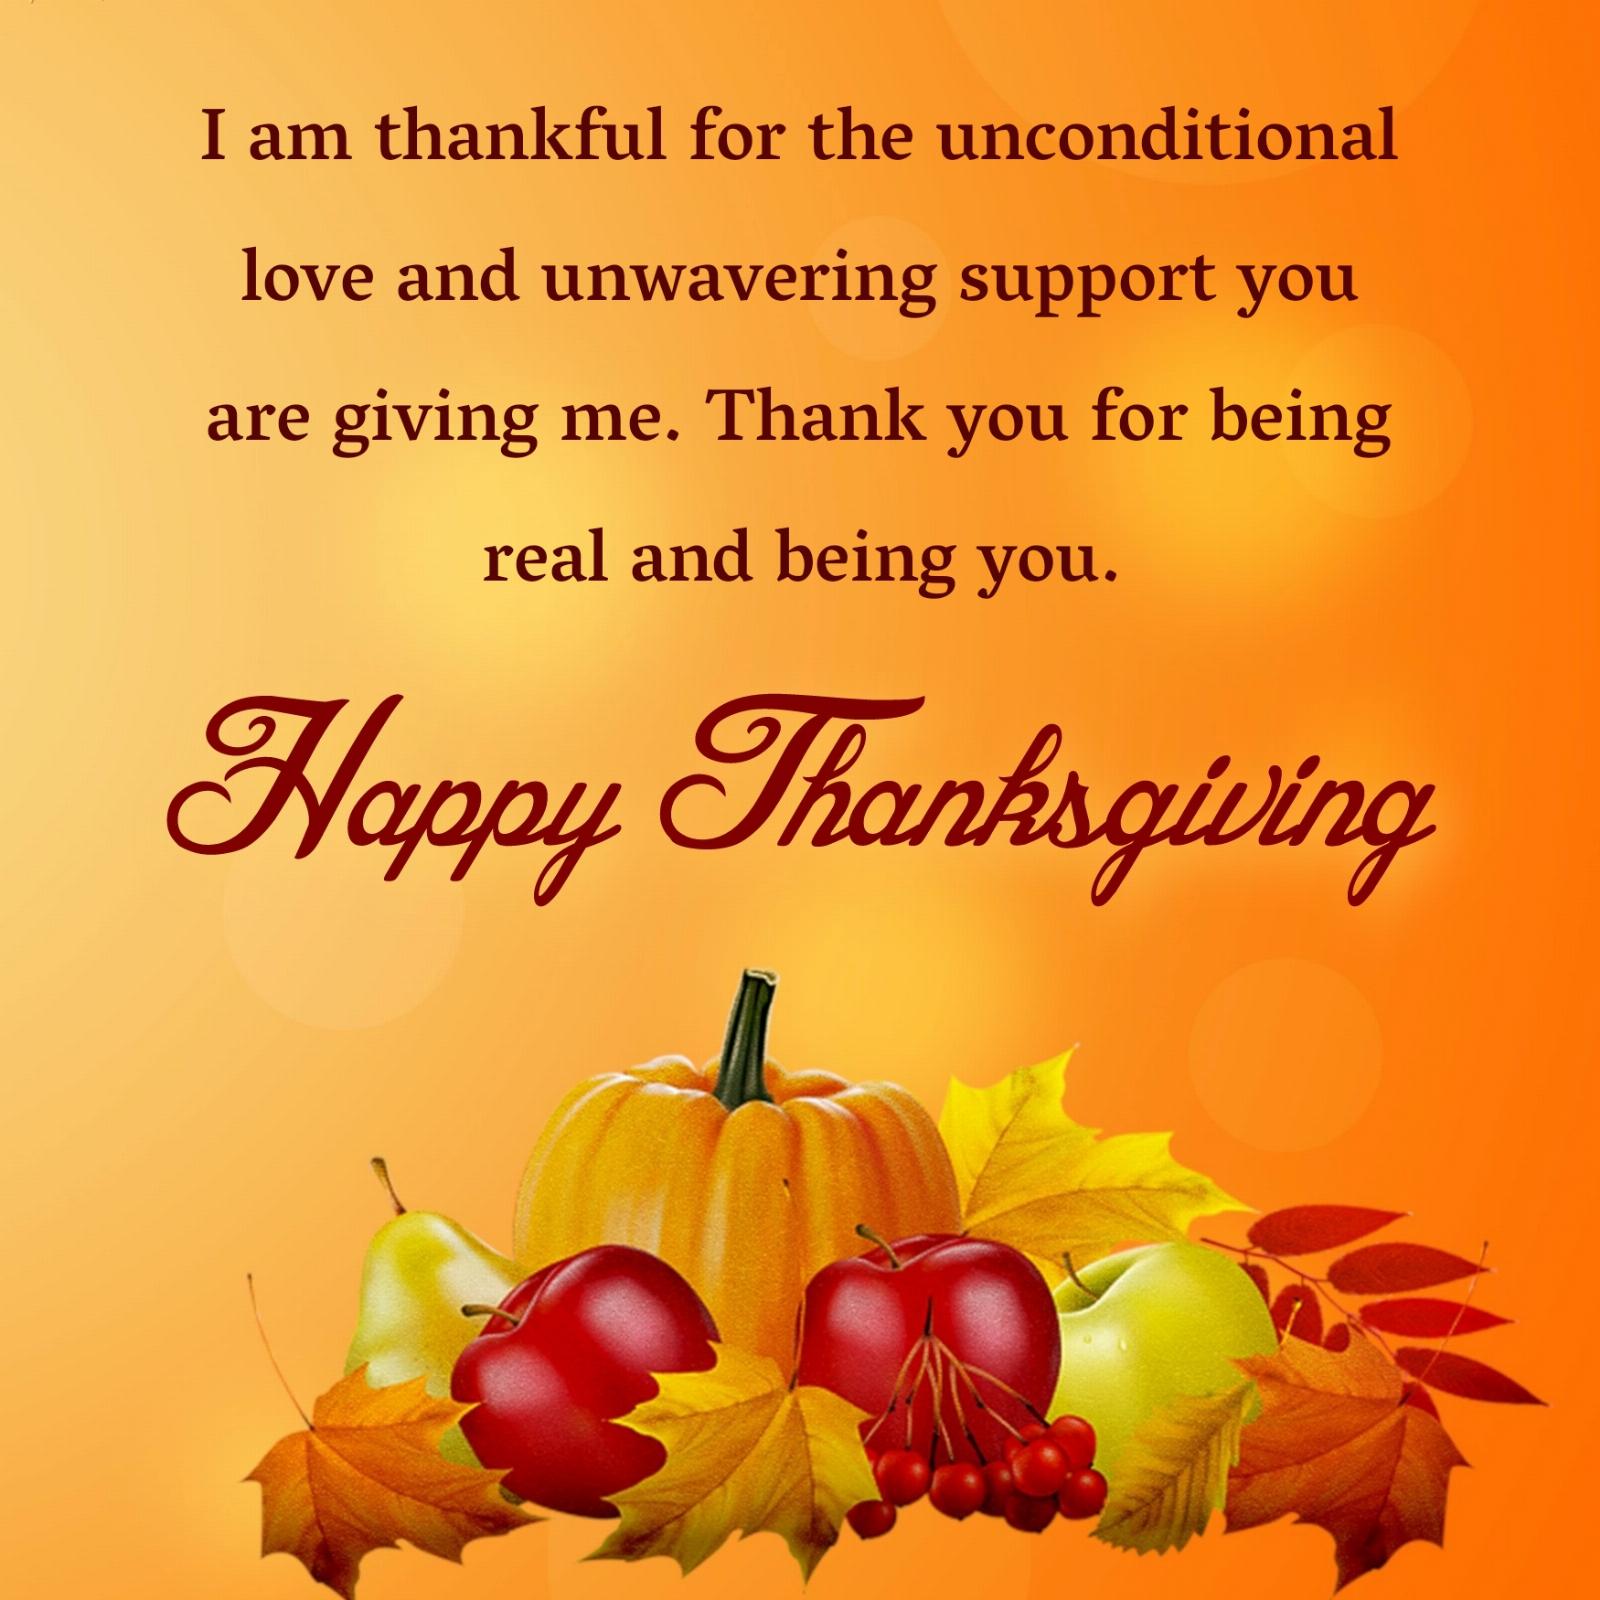 I am thankful for the unconditional love and unwavering support